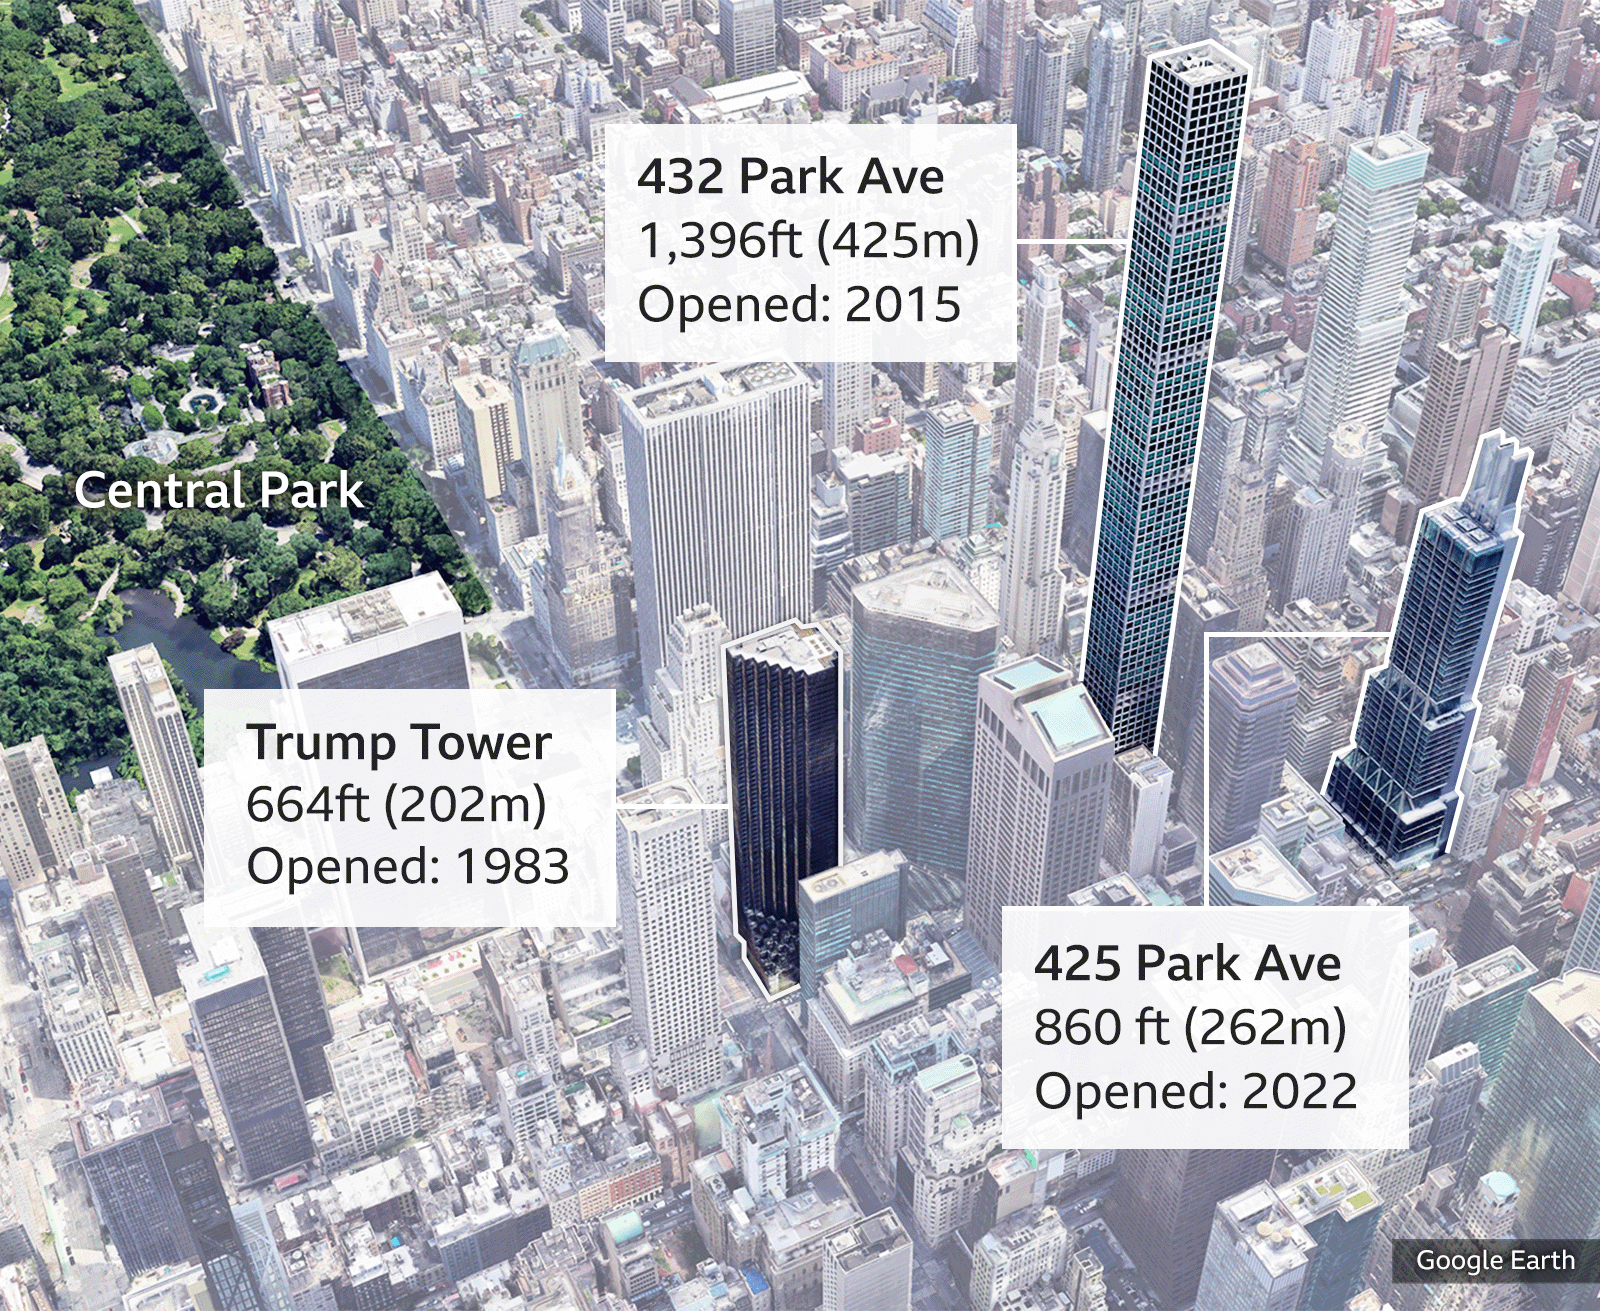 A graphic using a Google Earth image showing how Trump Tower compares in height to two of its more modern neighbours: Trump Tower is 664ft (202m) tall, while 425 Park Avenue is 860ft (262m) tall and 432 Park Avenue is 1,396ft (425m) tall. 